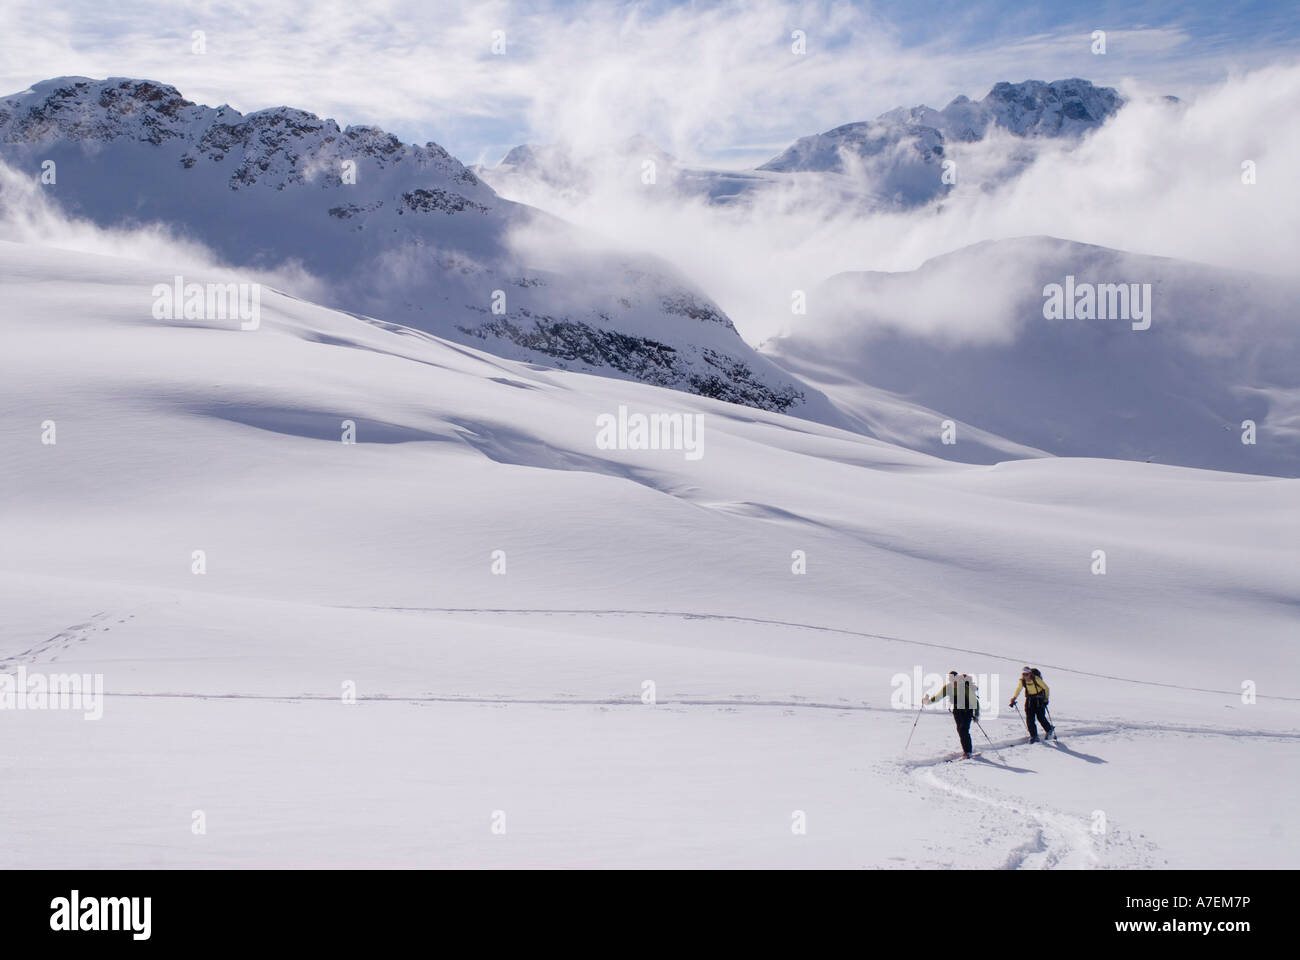 Skiers skinning on The Illicilliwaet Glacier, Rogers Pass area, Selkirk Mountains, Canadian Rockies, British Columbia, Canada Stock Photo